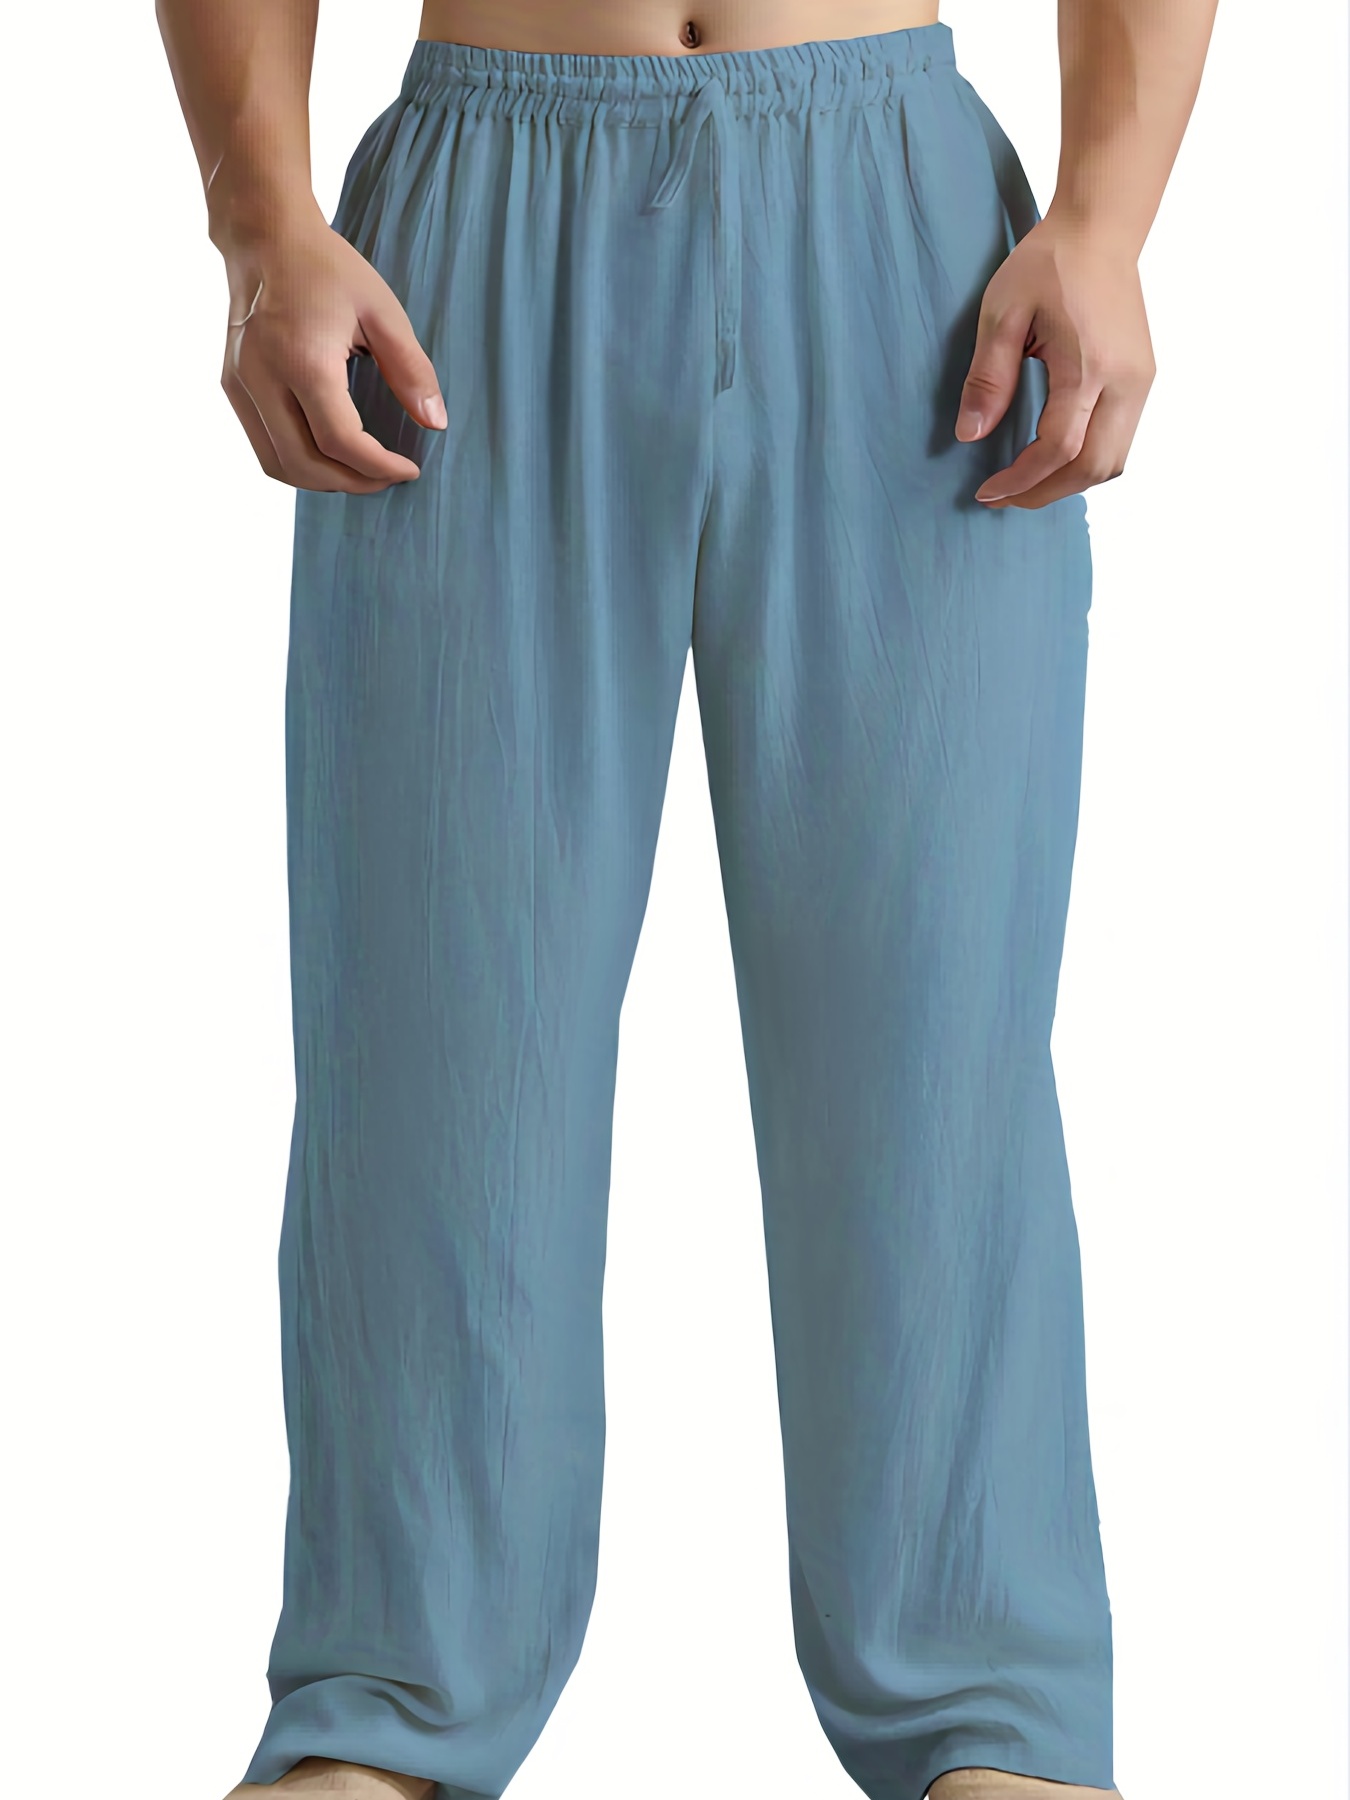 New Arrival Mens Elastic Waist Cotton and Linen Trousers Men Solid